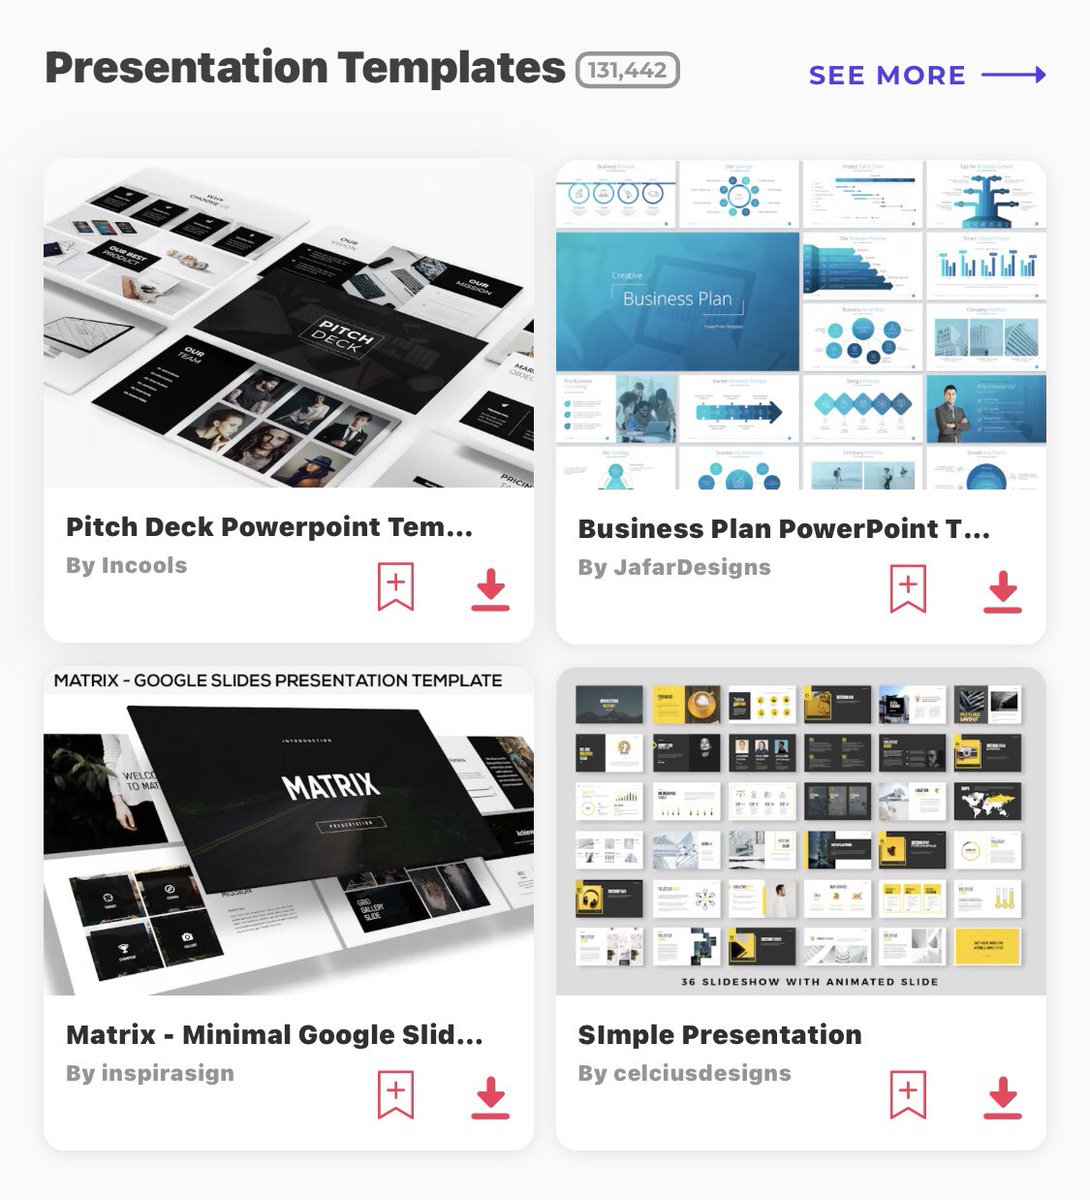 Presentation Templates And Themes
No matter the type of presentation you are working on, @envato has the right creative assets for you. #presentations #PowerPoint #template #theme #envato #envatoelements #envatomarket #themes 
@envato @EnvatoMarket : 1.envato.market/vNdeXL